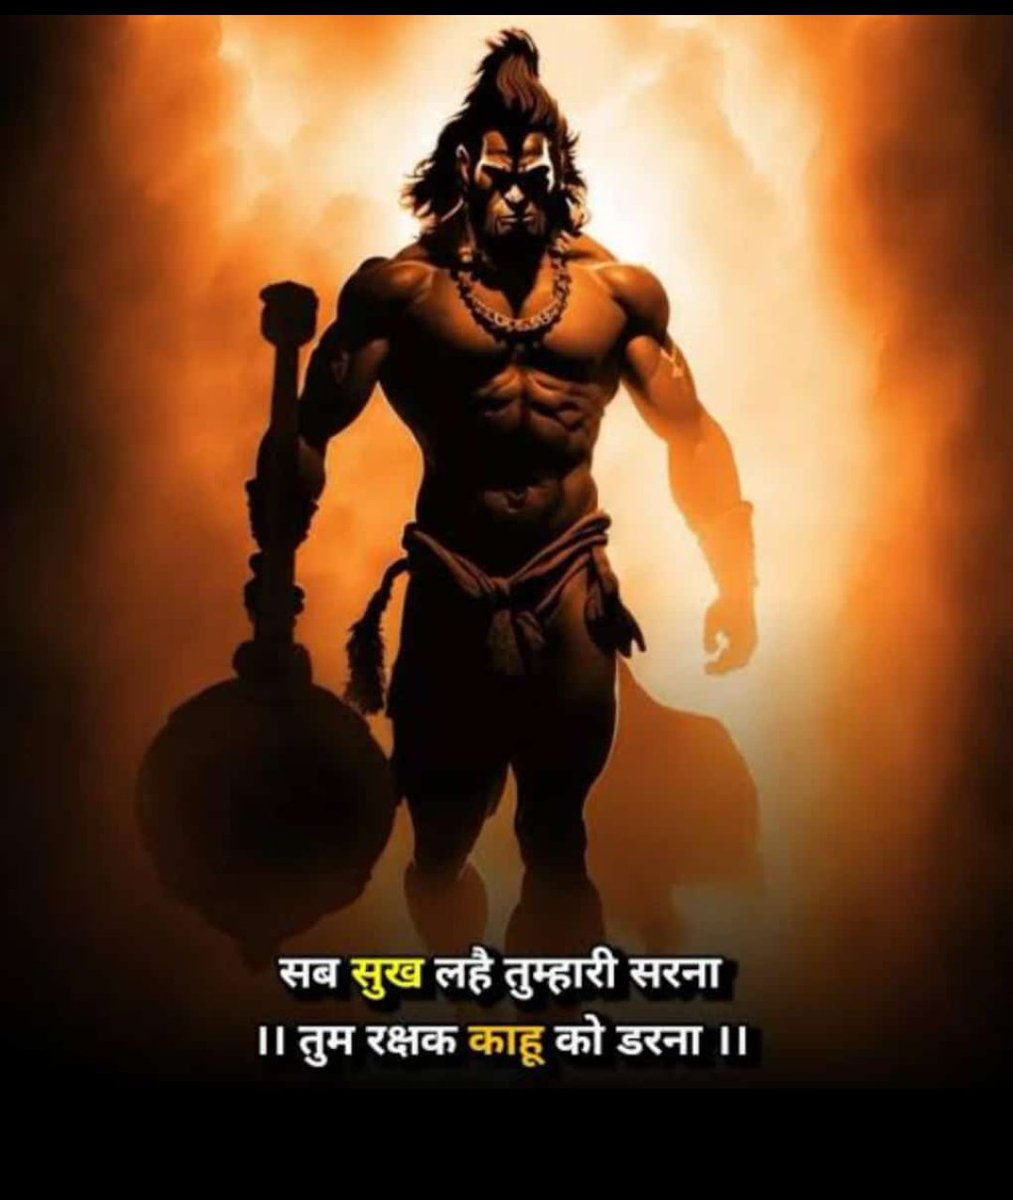 Sant Shri Asharamji Bapu has mentioned in His discourses that Chaitra Poornima is celebrated as #हनुमान_जन्मोत्सव , which is very auspicious day for seekers. Lord Hanuman was true disciple who set example of Swami Bhakti & became exemplary for the world.
Shubh Hanuman Janmotsav !